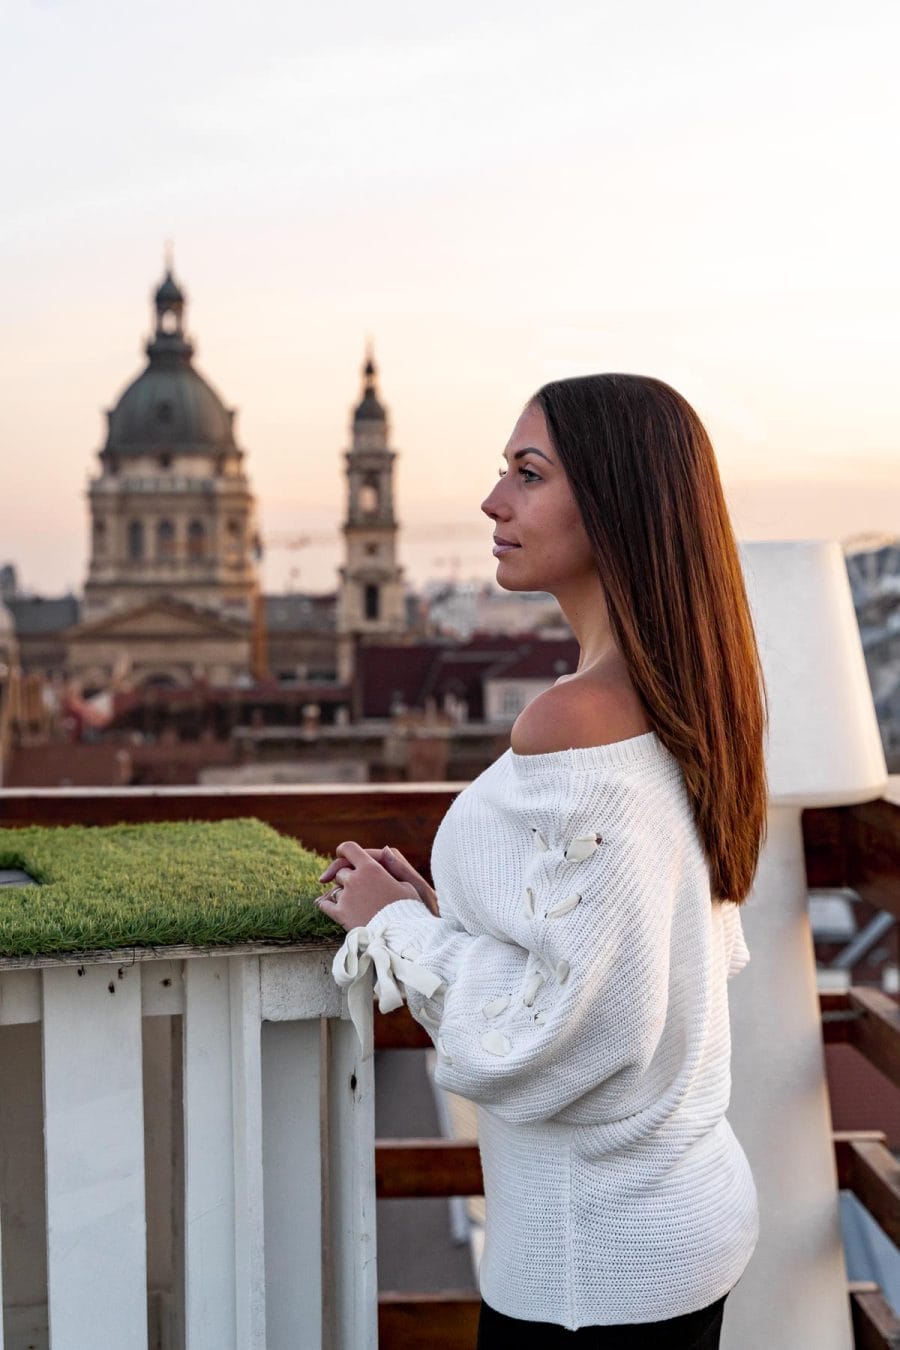 Girl in a white sweater standing at the Intermezzo Roof Terrace, looking at the St. Stephen's Basilica